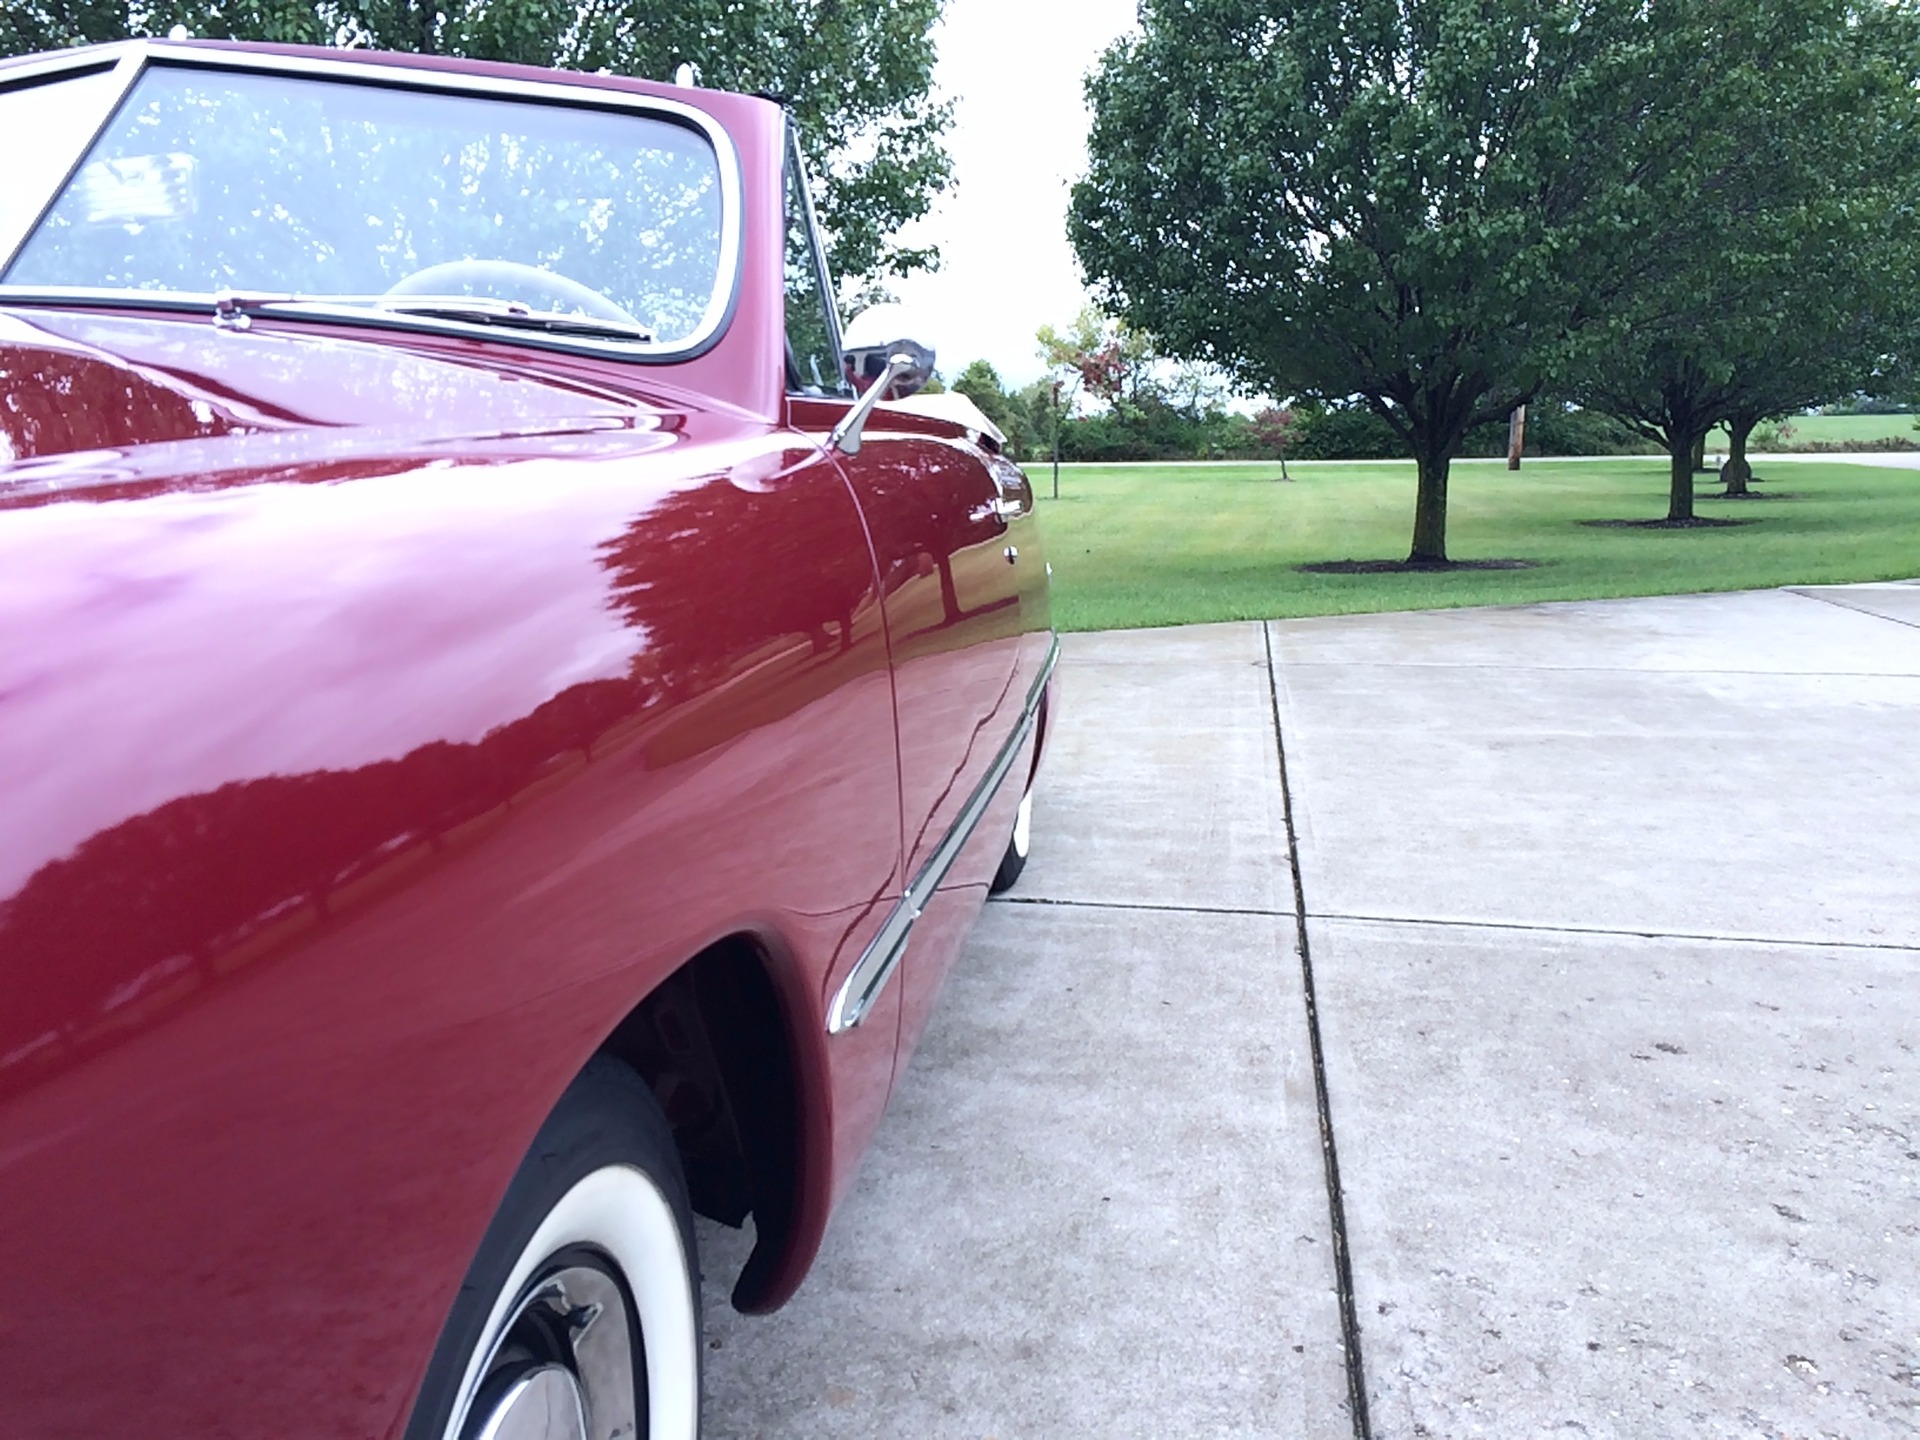 Used 1949 Ford Deluxe Convertible